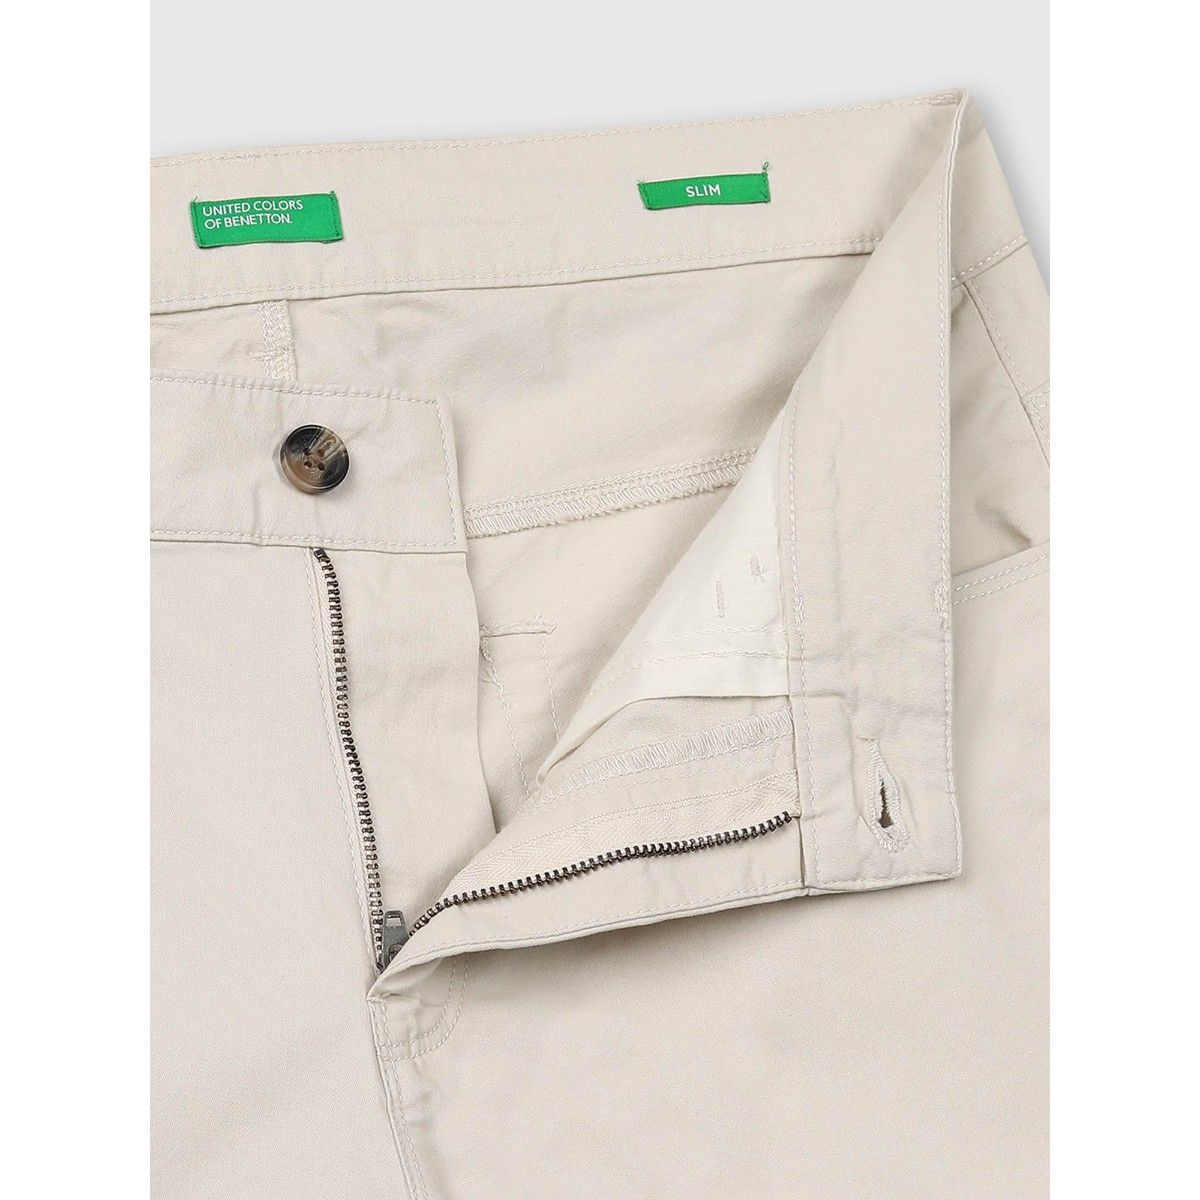 United Colors Of Benetton Solid Trousers Buy United Colors Of Benetton  Solid Trousers Online at Best Price in India  NykaaMan